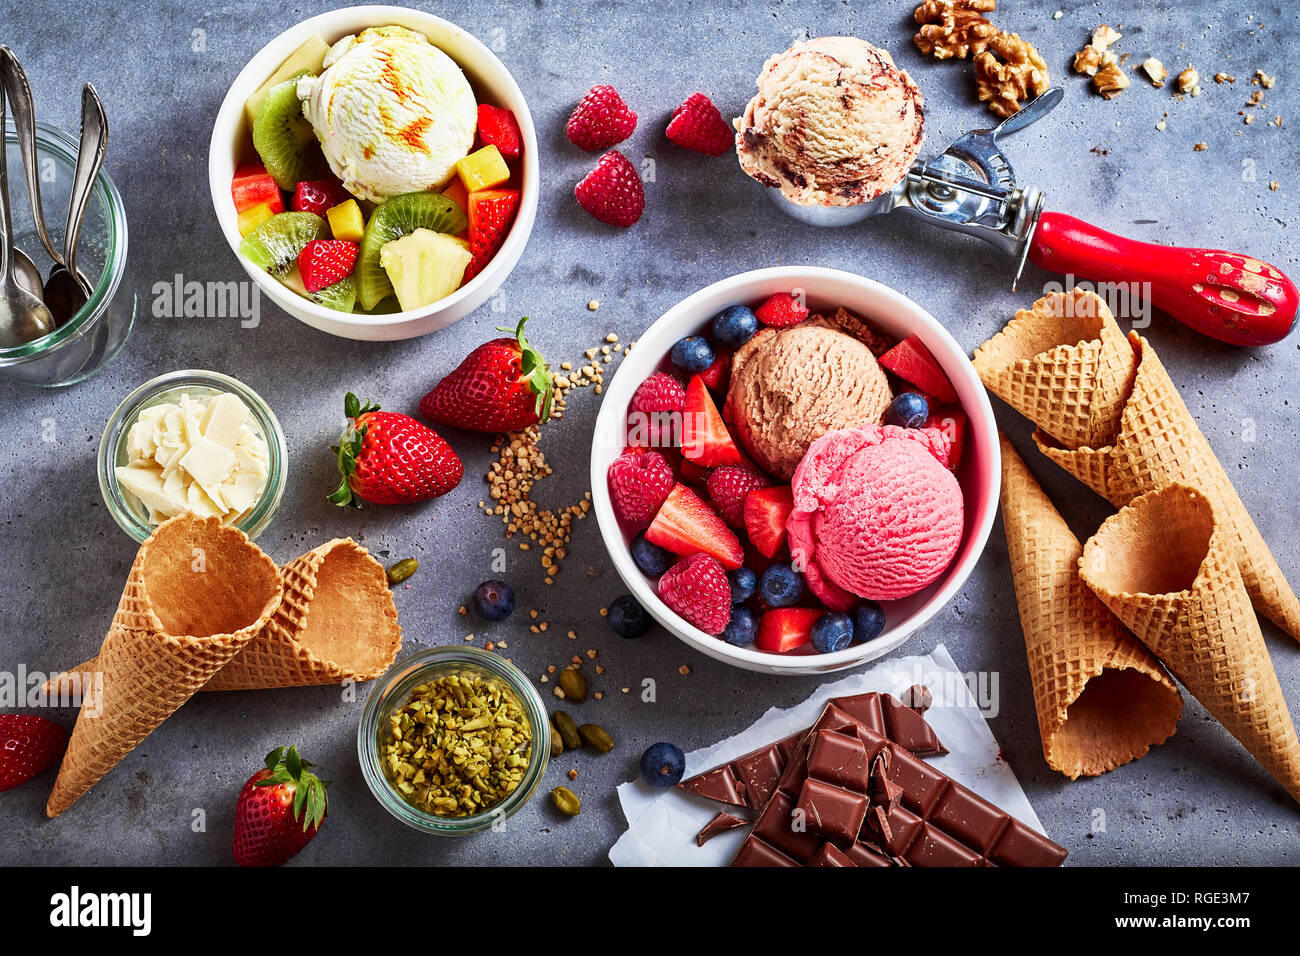 https://c8.alamy.com/comp/RGE3M7/fresh-fruit-with-scoops-of-creamy-speciality-ice-cream-in-assorted-flavors-with-raspberry-berry-blueberry-strawberry-walnut-pistachio-chocolate-RGE3M7.jpg